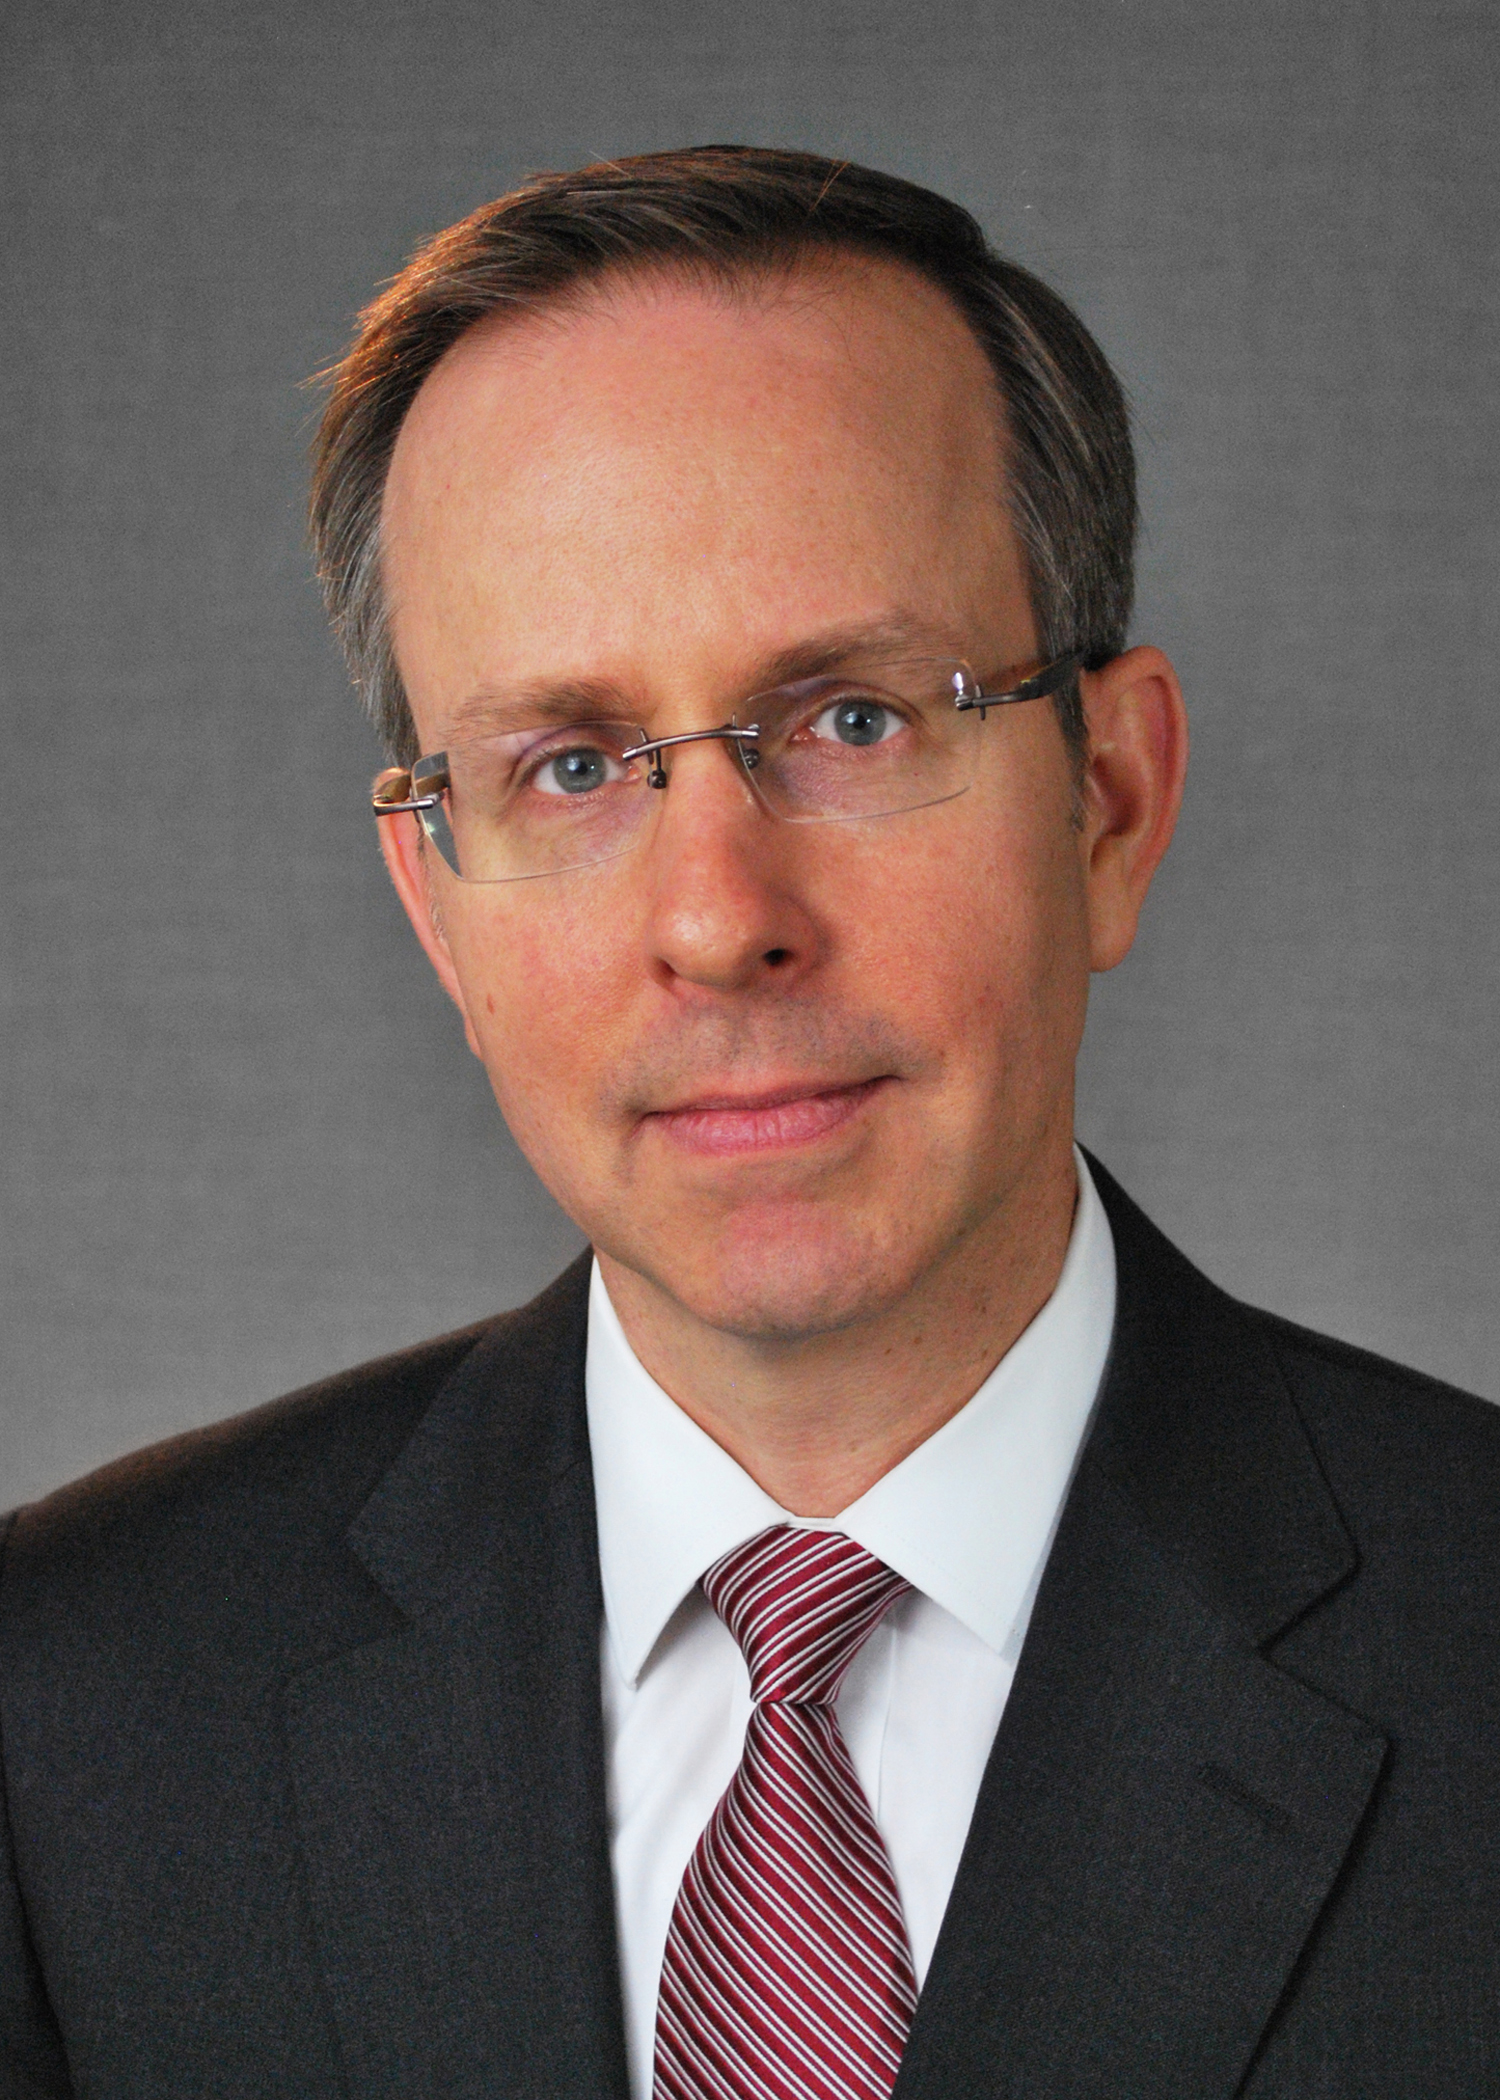 David Bloom joined Wilmington Trust as managing director for Wealth Advisory in the Greater Philadelphia market.